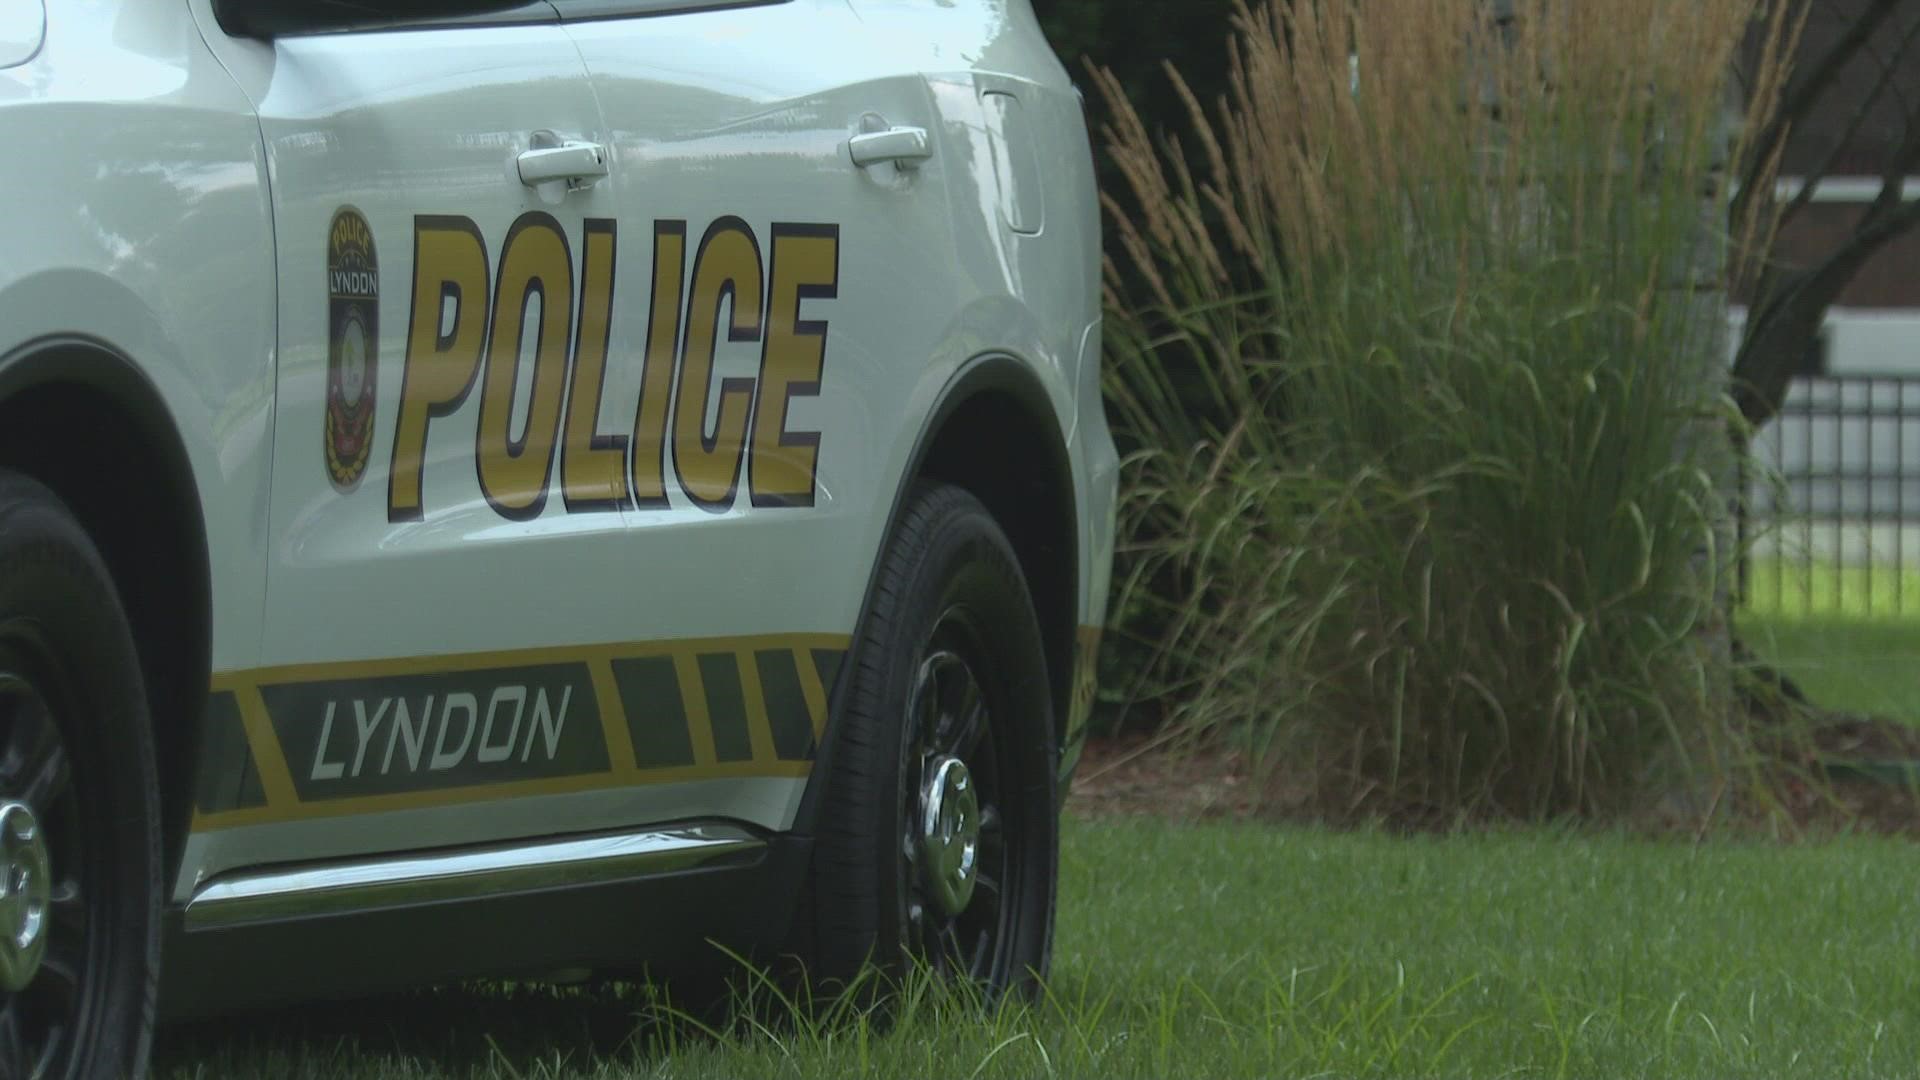 It will replace the Graymoor-Devondale Police Department, which has historically responded to incidents in the Lyndon area.